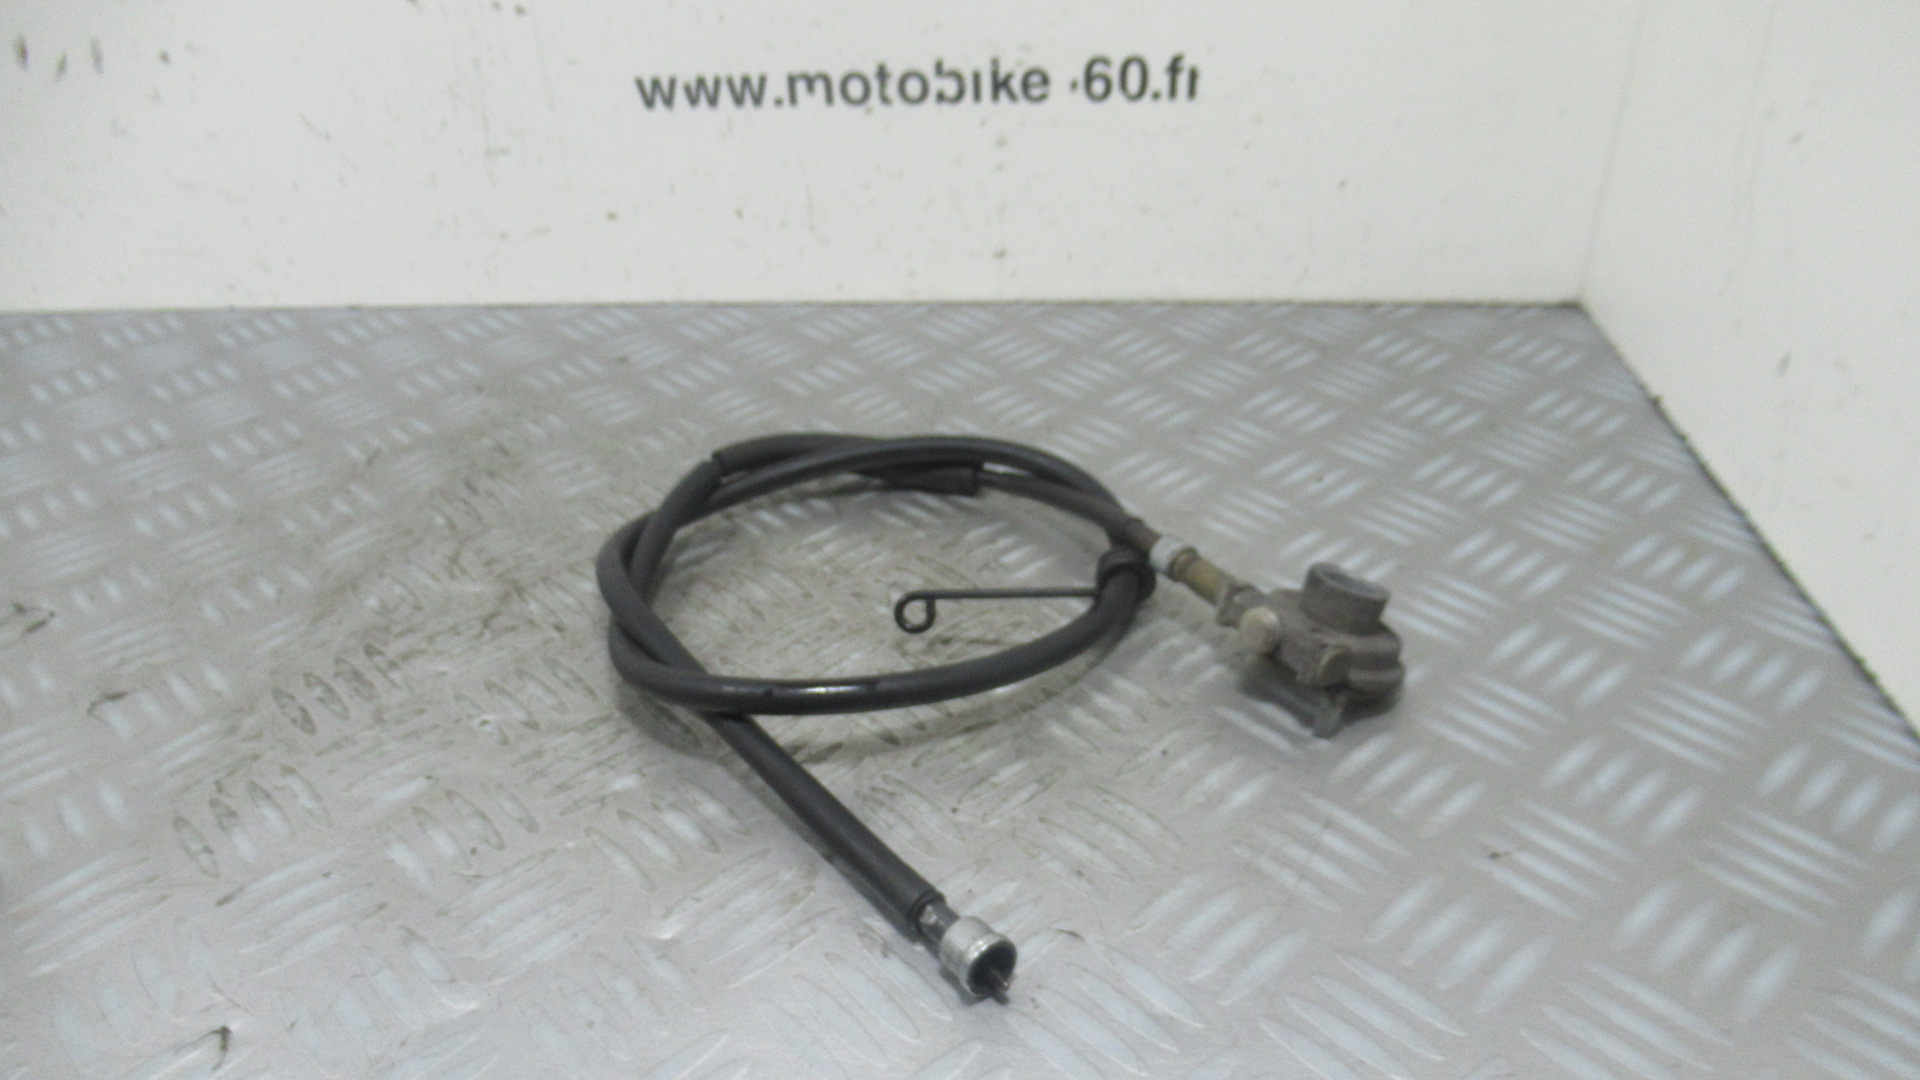 Cable compteur Piaggio Typhoon 50 2t Ph2